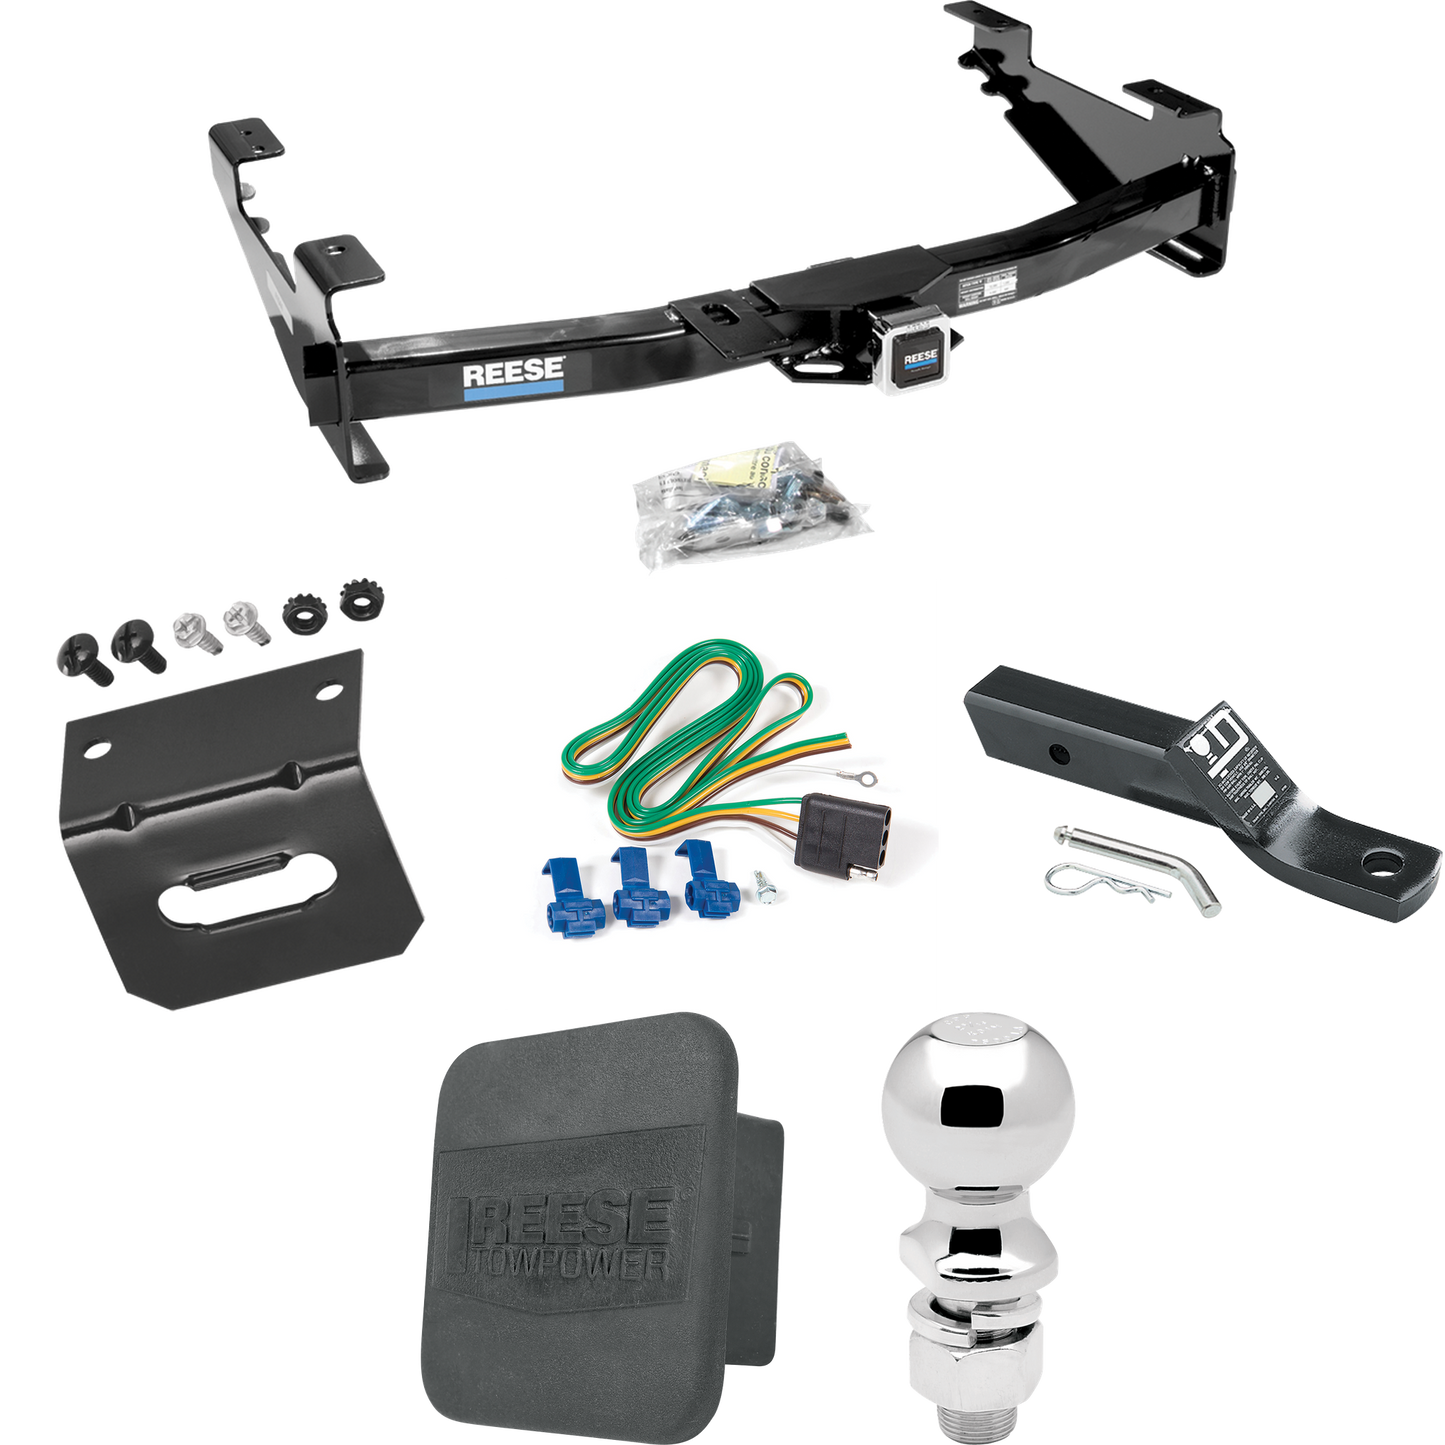 Fits 2001-2002 Chevrolet Silverado 2500 HD Trailer Hitch Tow PKG w/ 4-Flat Wiring + Ball Mount w/ 2" Drop + 2-5/16" Ball + Wiring Bracket + Hitch Cover By Reese Towpower